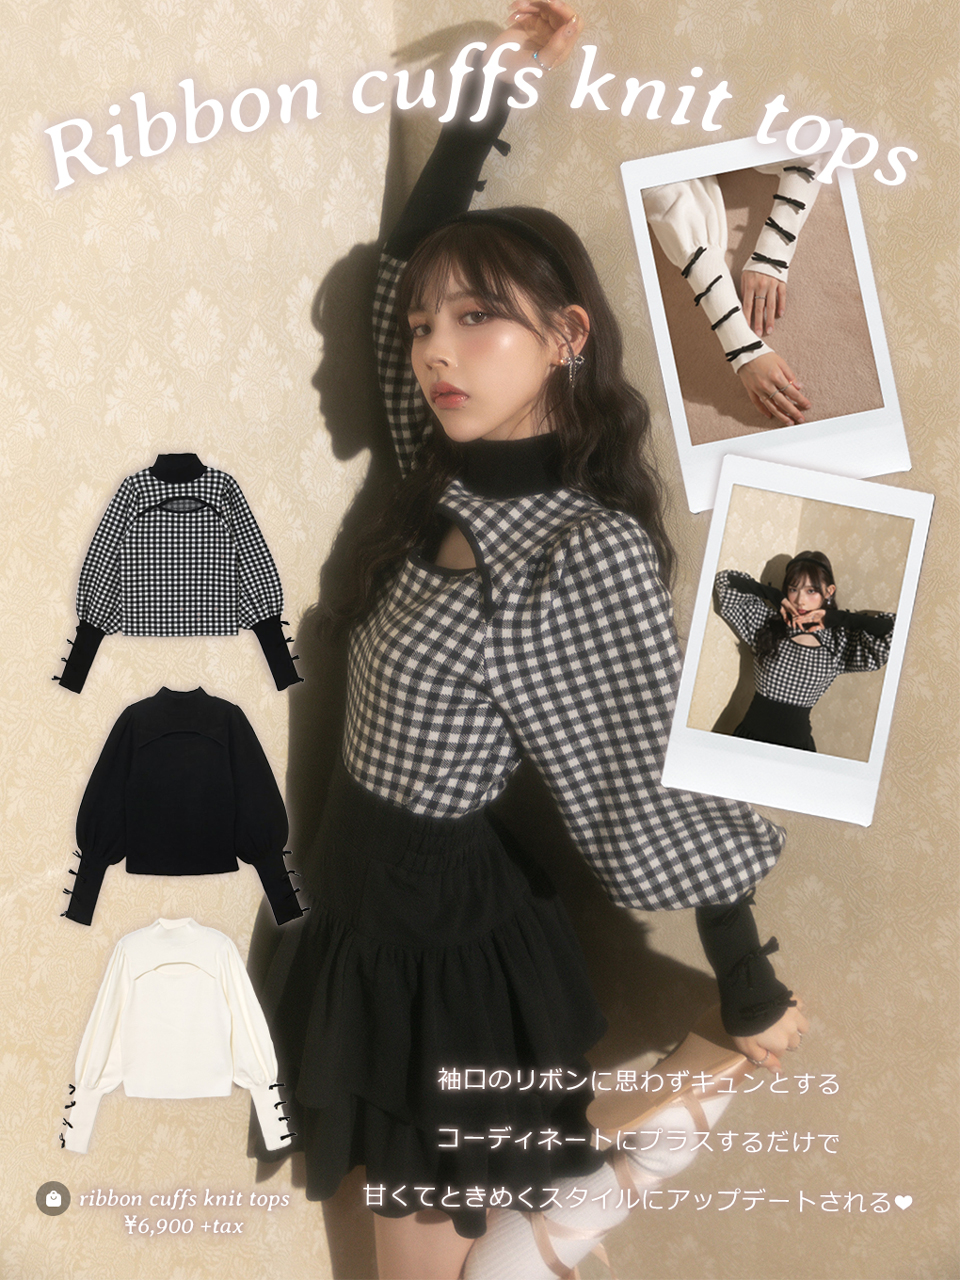 AUTUMN GIRLY BEGINS | sparkling mall online store